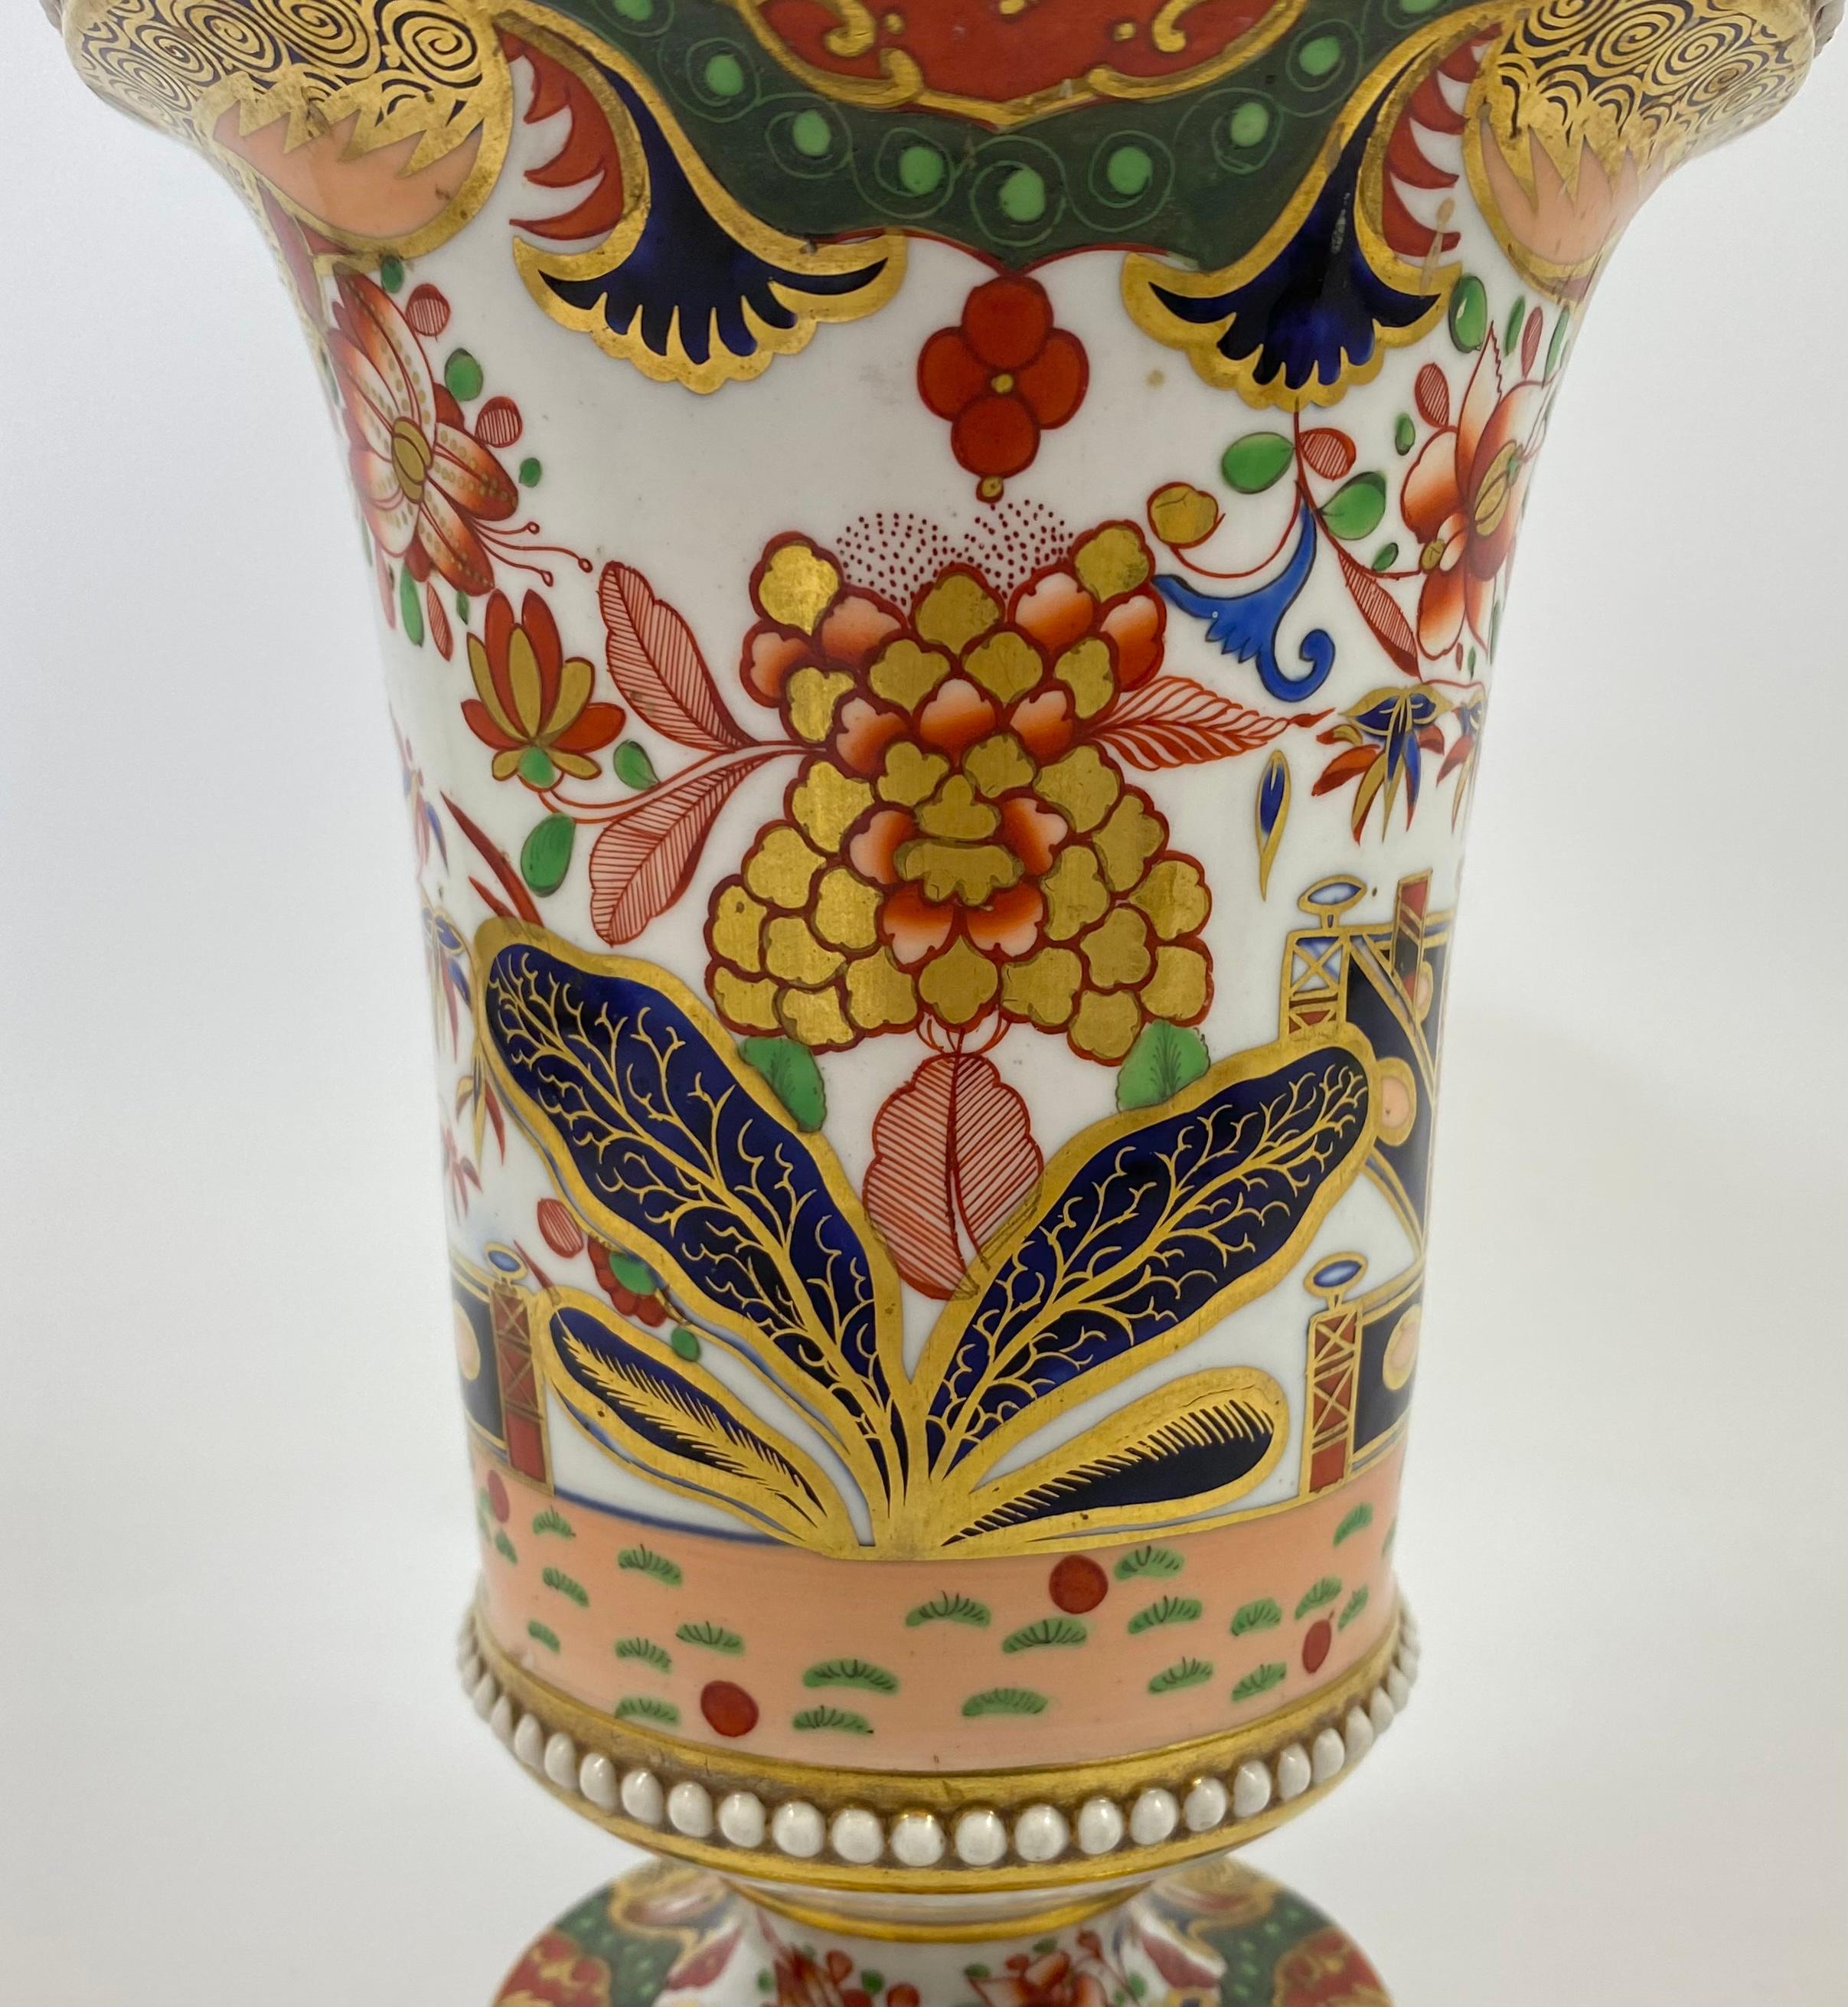 An outstanding and rare Spode porcelain garniture of spill vases, c. 1810. Each vase beautifully painted in pattern number ‘967’ with a continuous Imari style design of flowering plants, before a fence, in a garden setting, beneath elaborate scroll